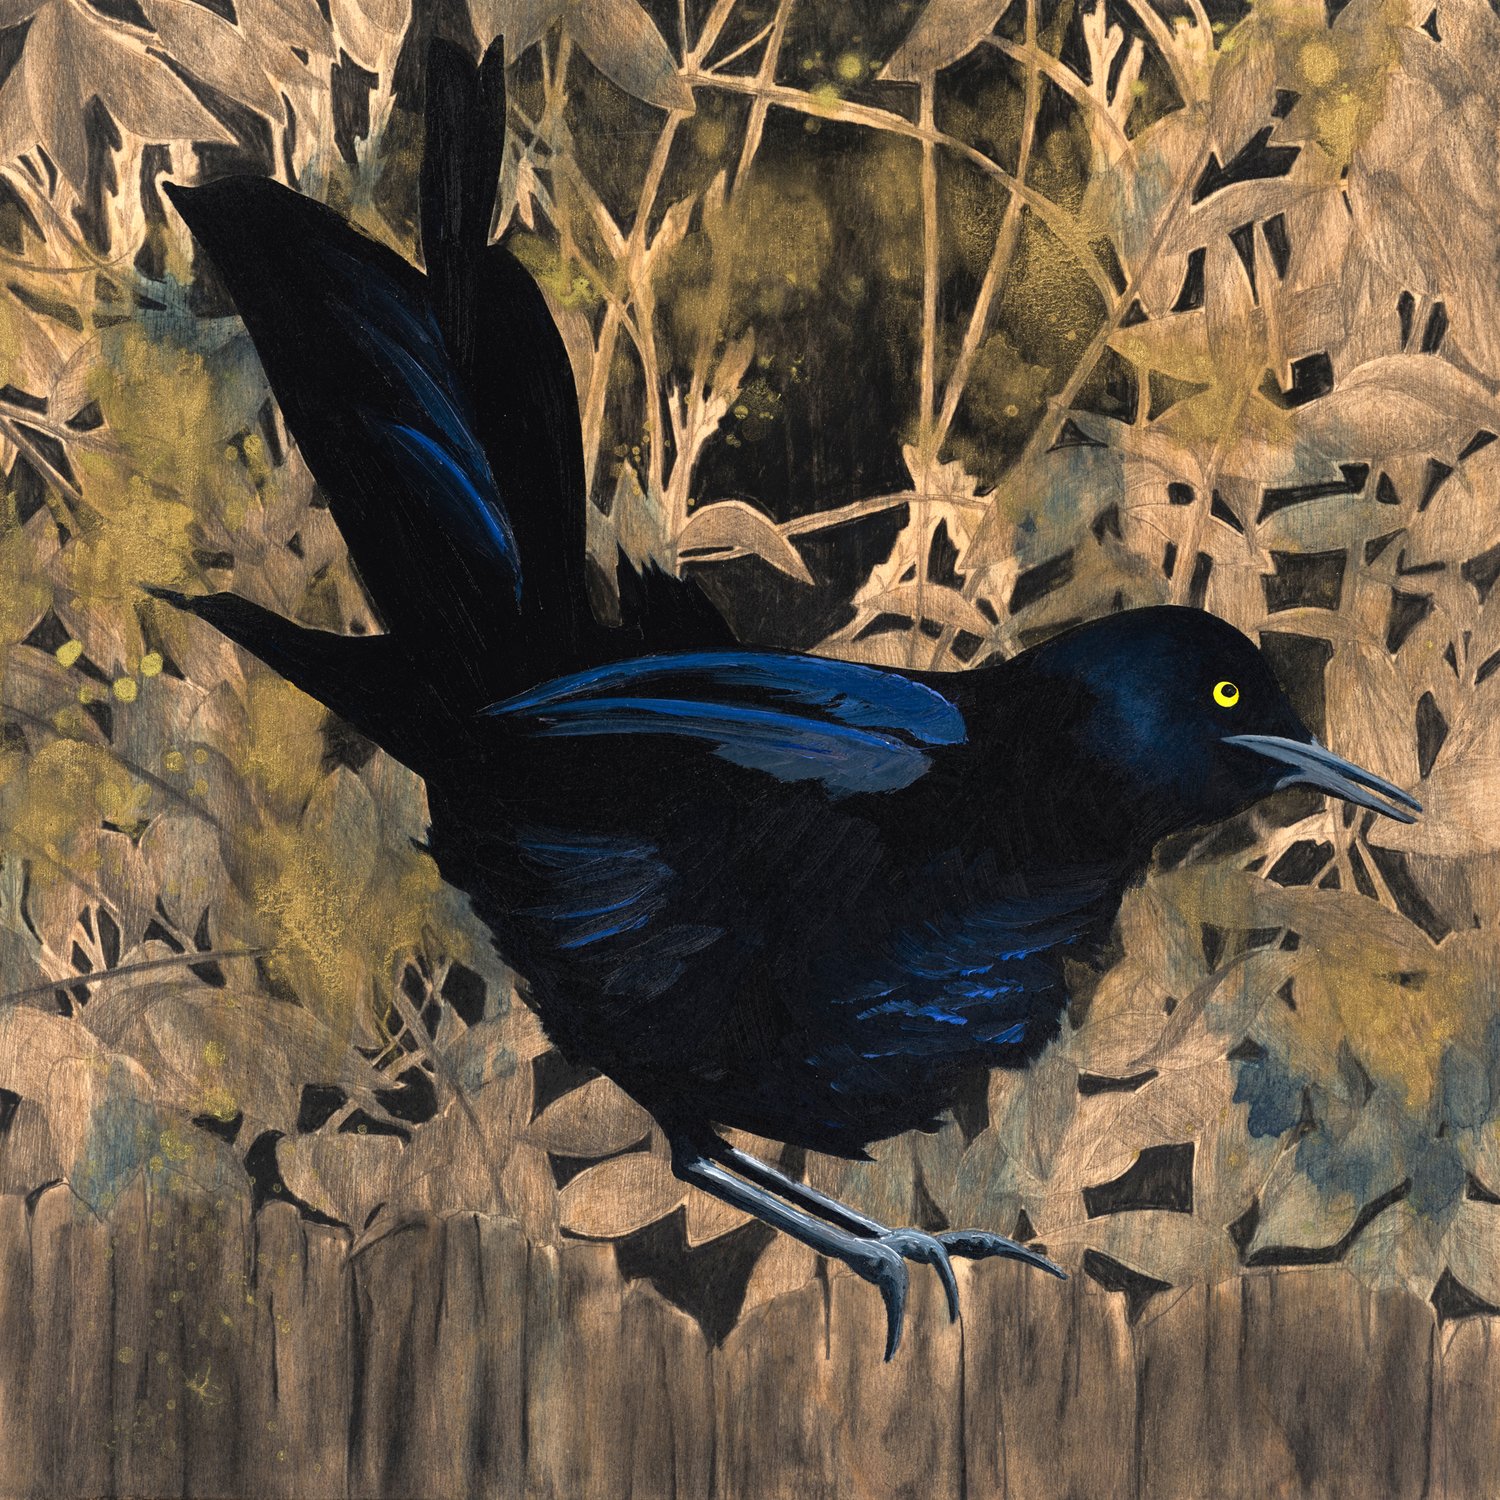 Eclipse Grackle #19 by Carly Weaver - Original Painting